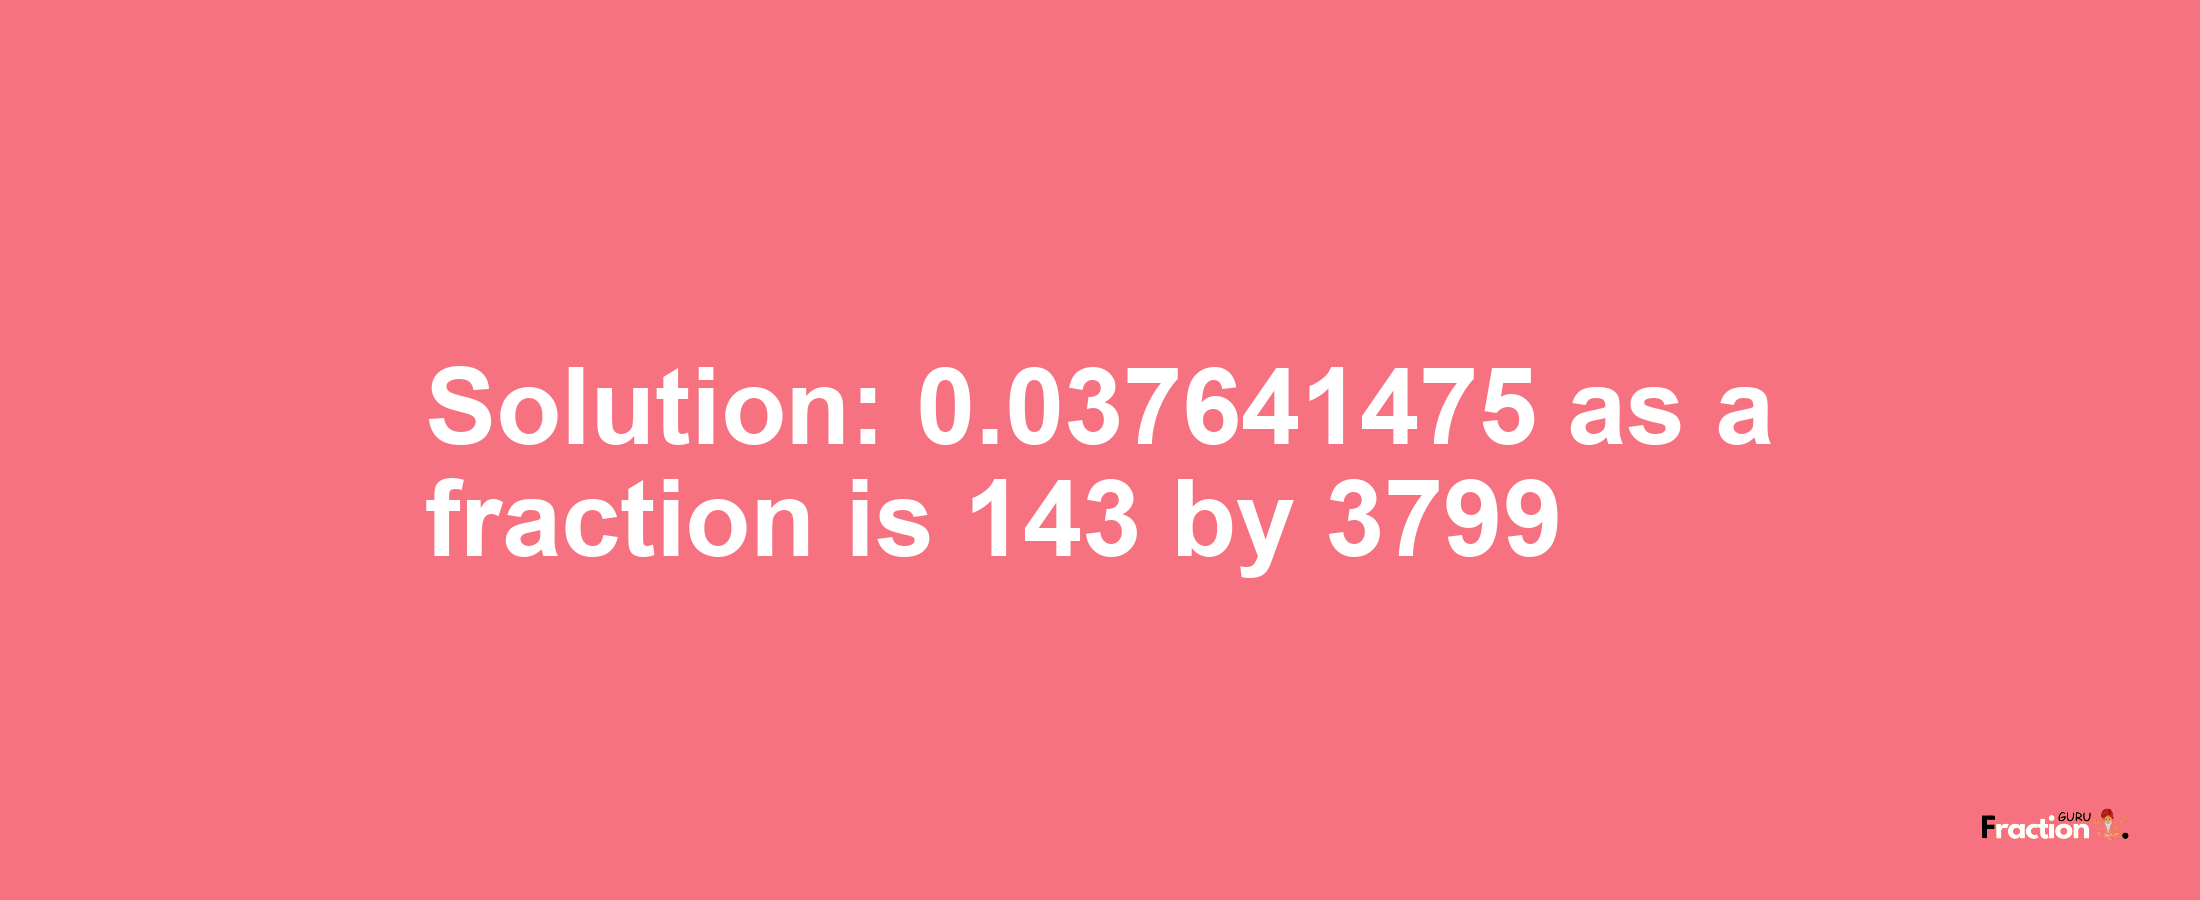 Solution:0.037641475 as a fraction is 143/3799